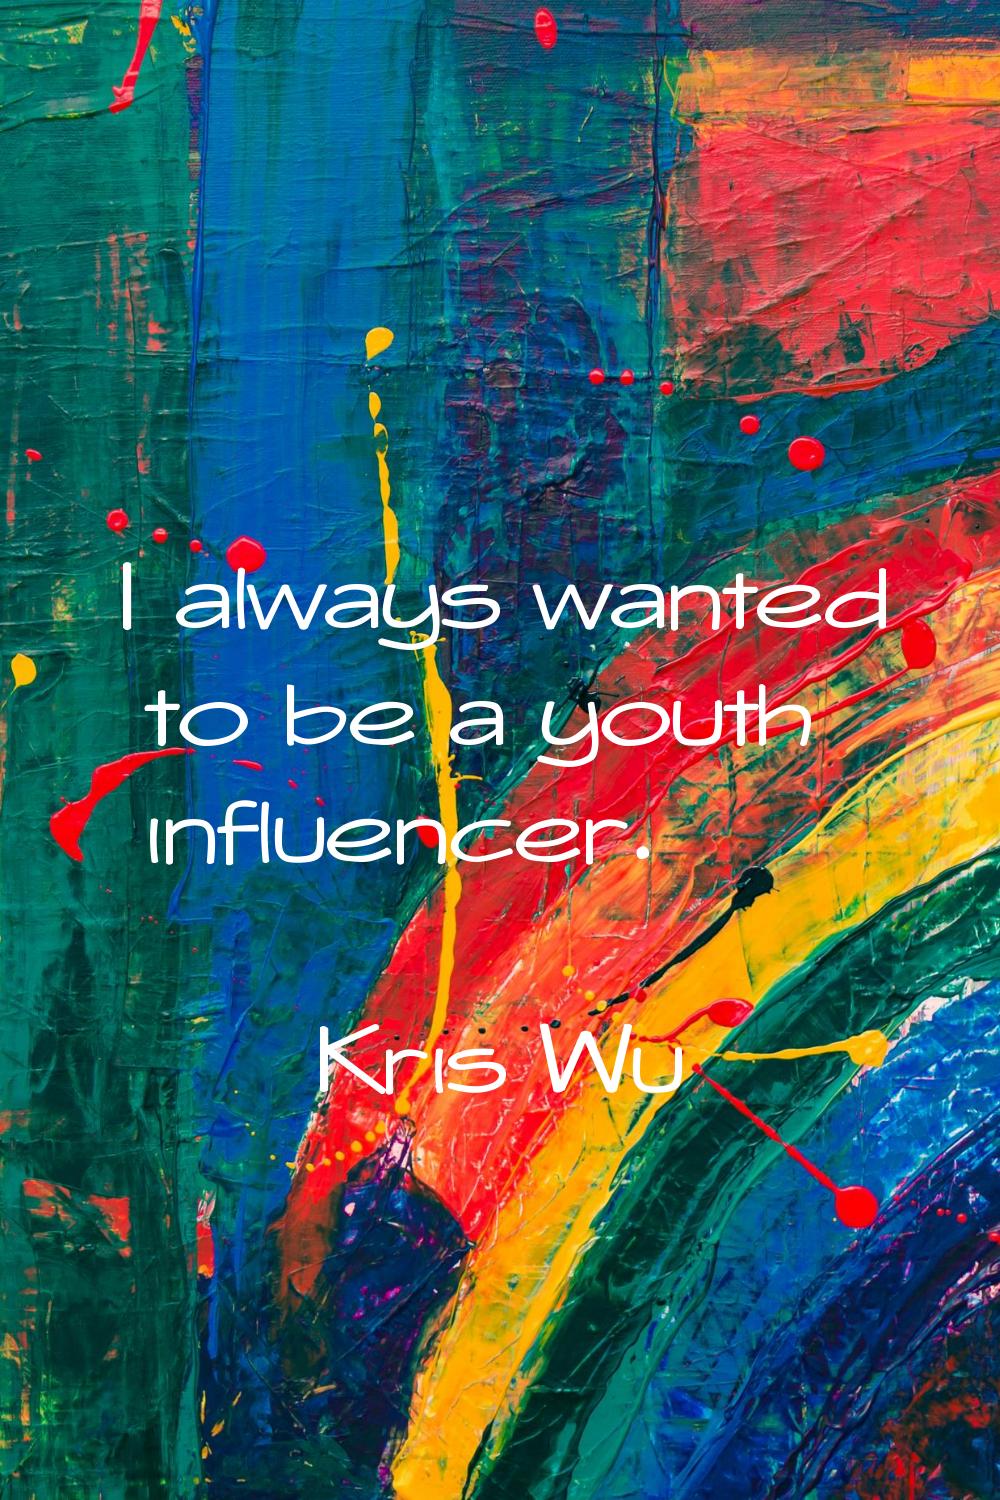 I always wanted to be a youth influencer.